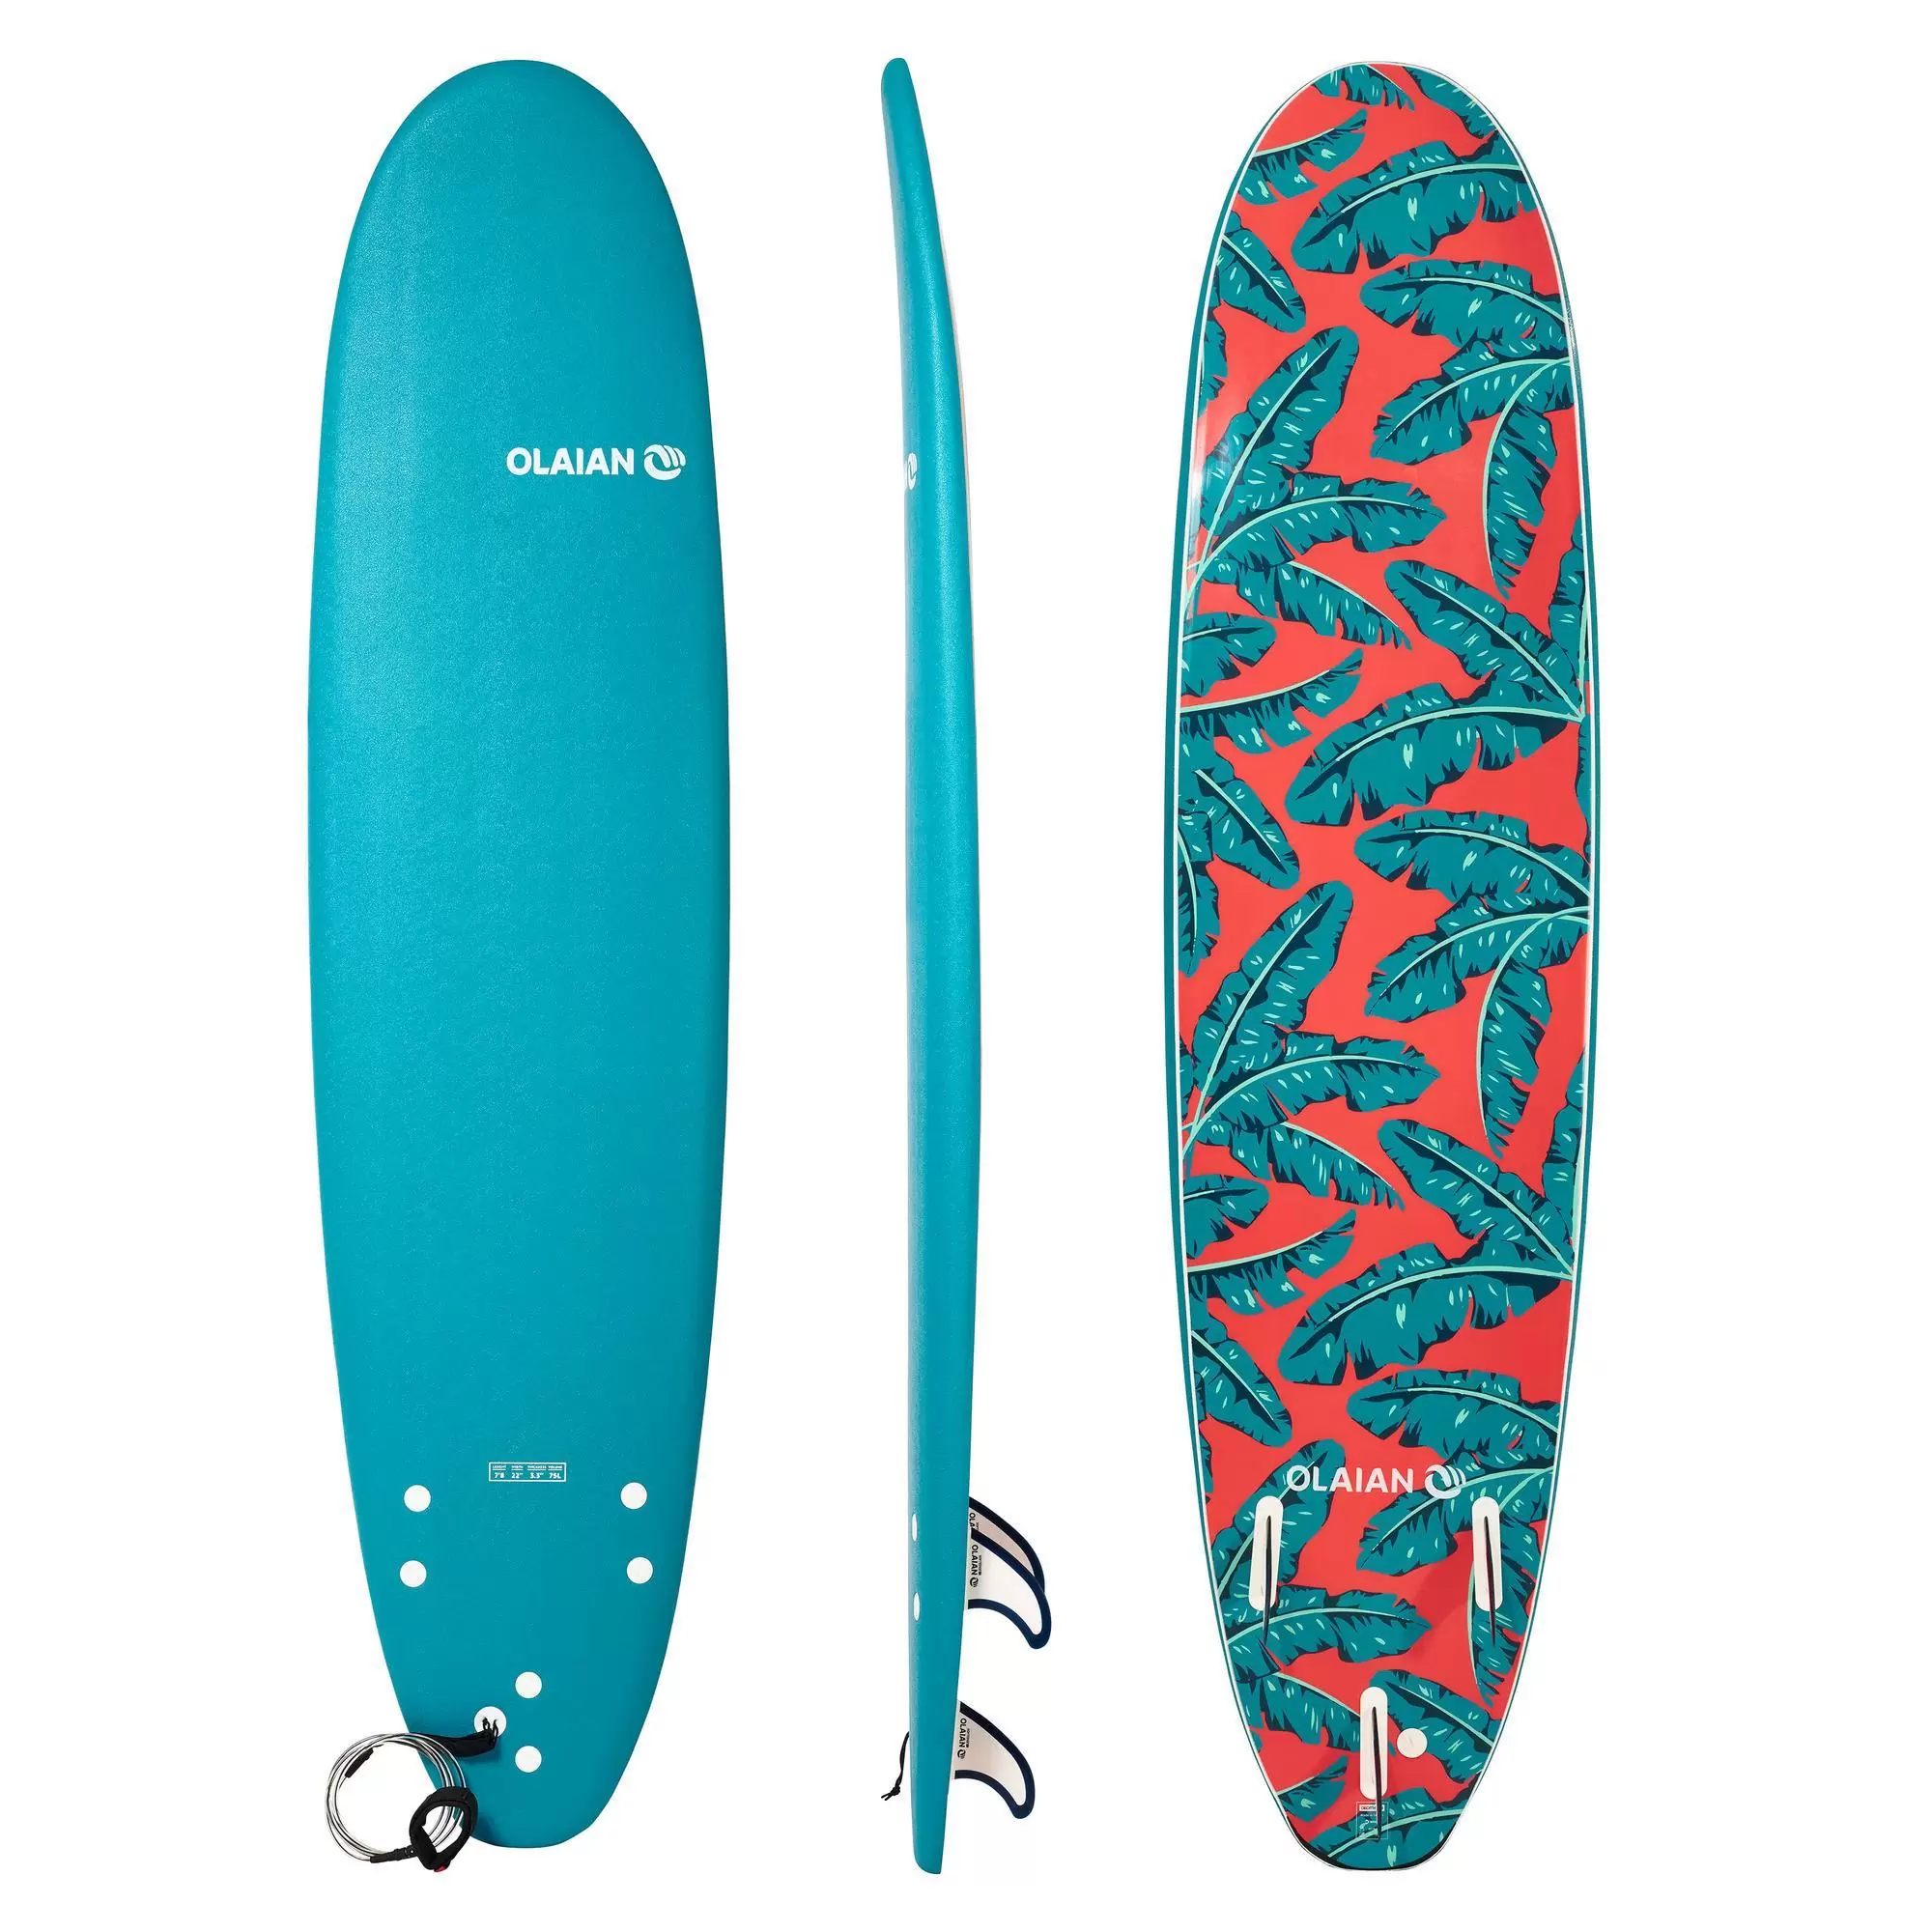 olaian 78 surfboard review